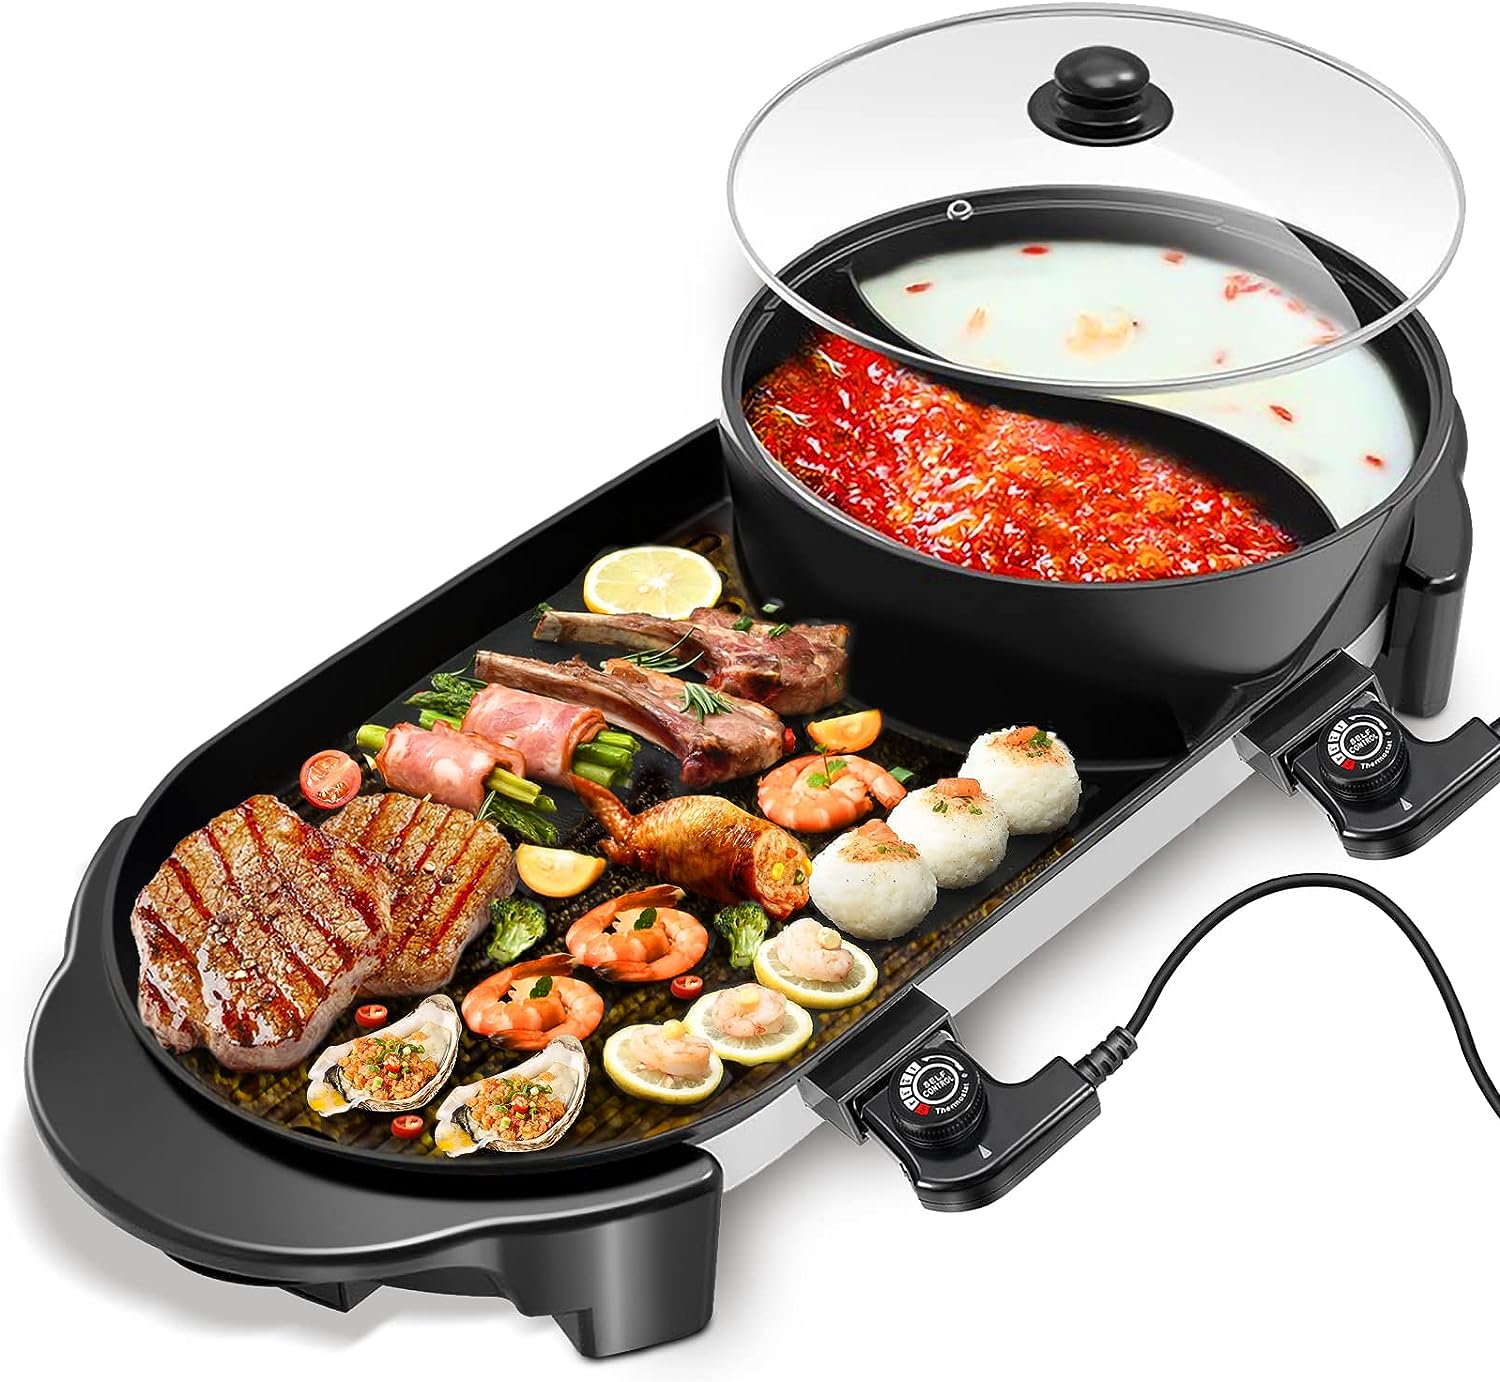 https://storables.com/wp-content/uploads/2023/08/15-best-hot-pot-and-grill-for-2023-1691891035.jpg